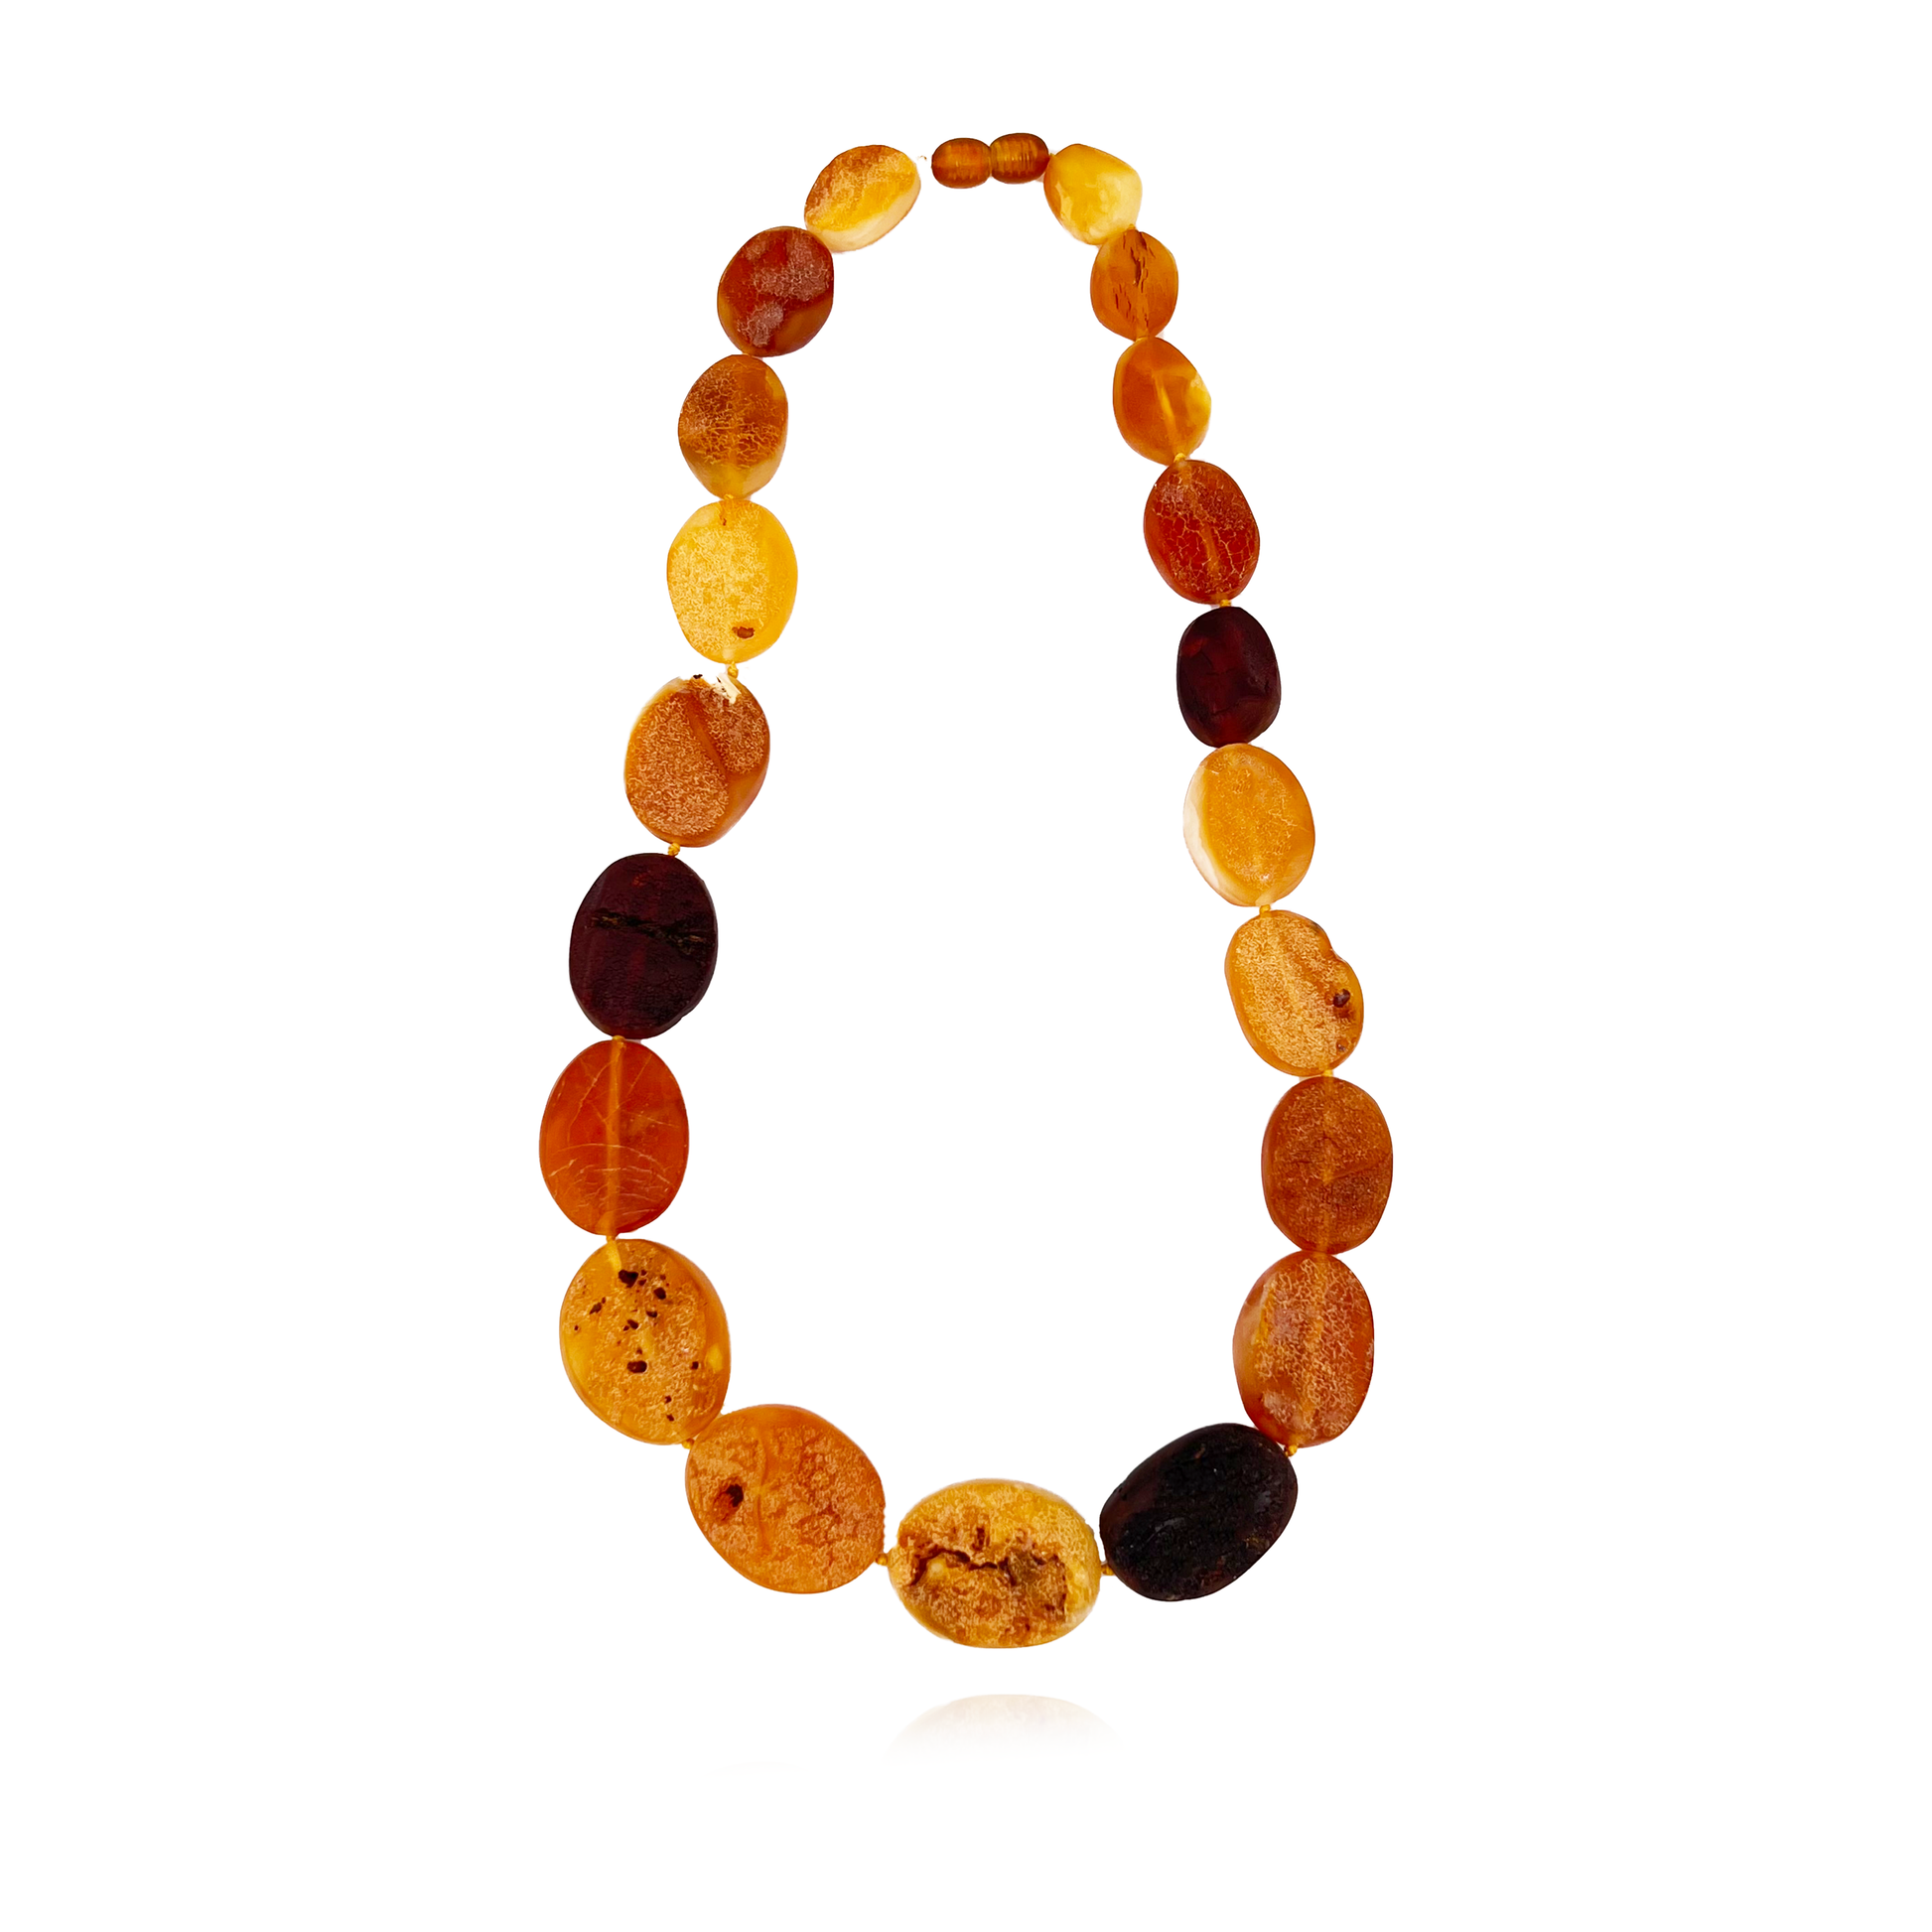 Amber necklace "Baltic pebbles"